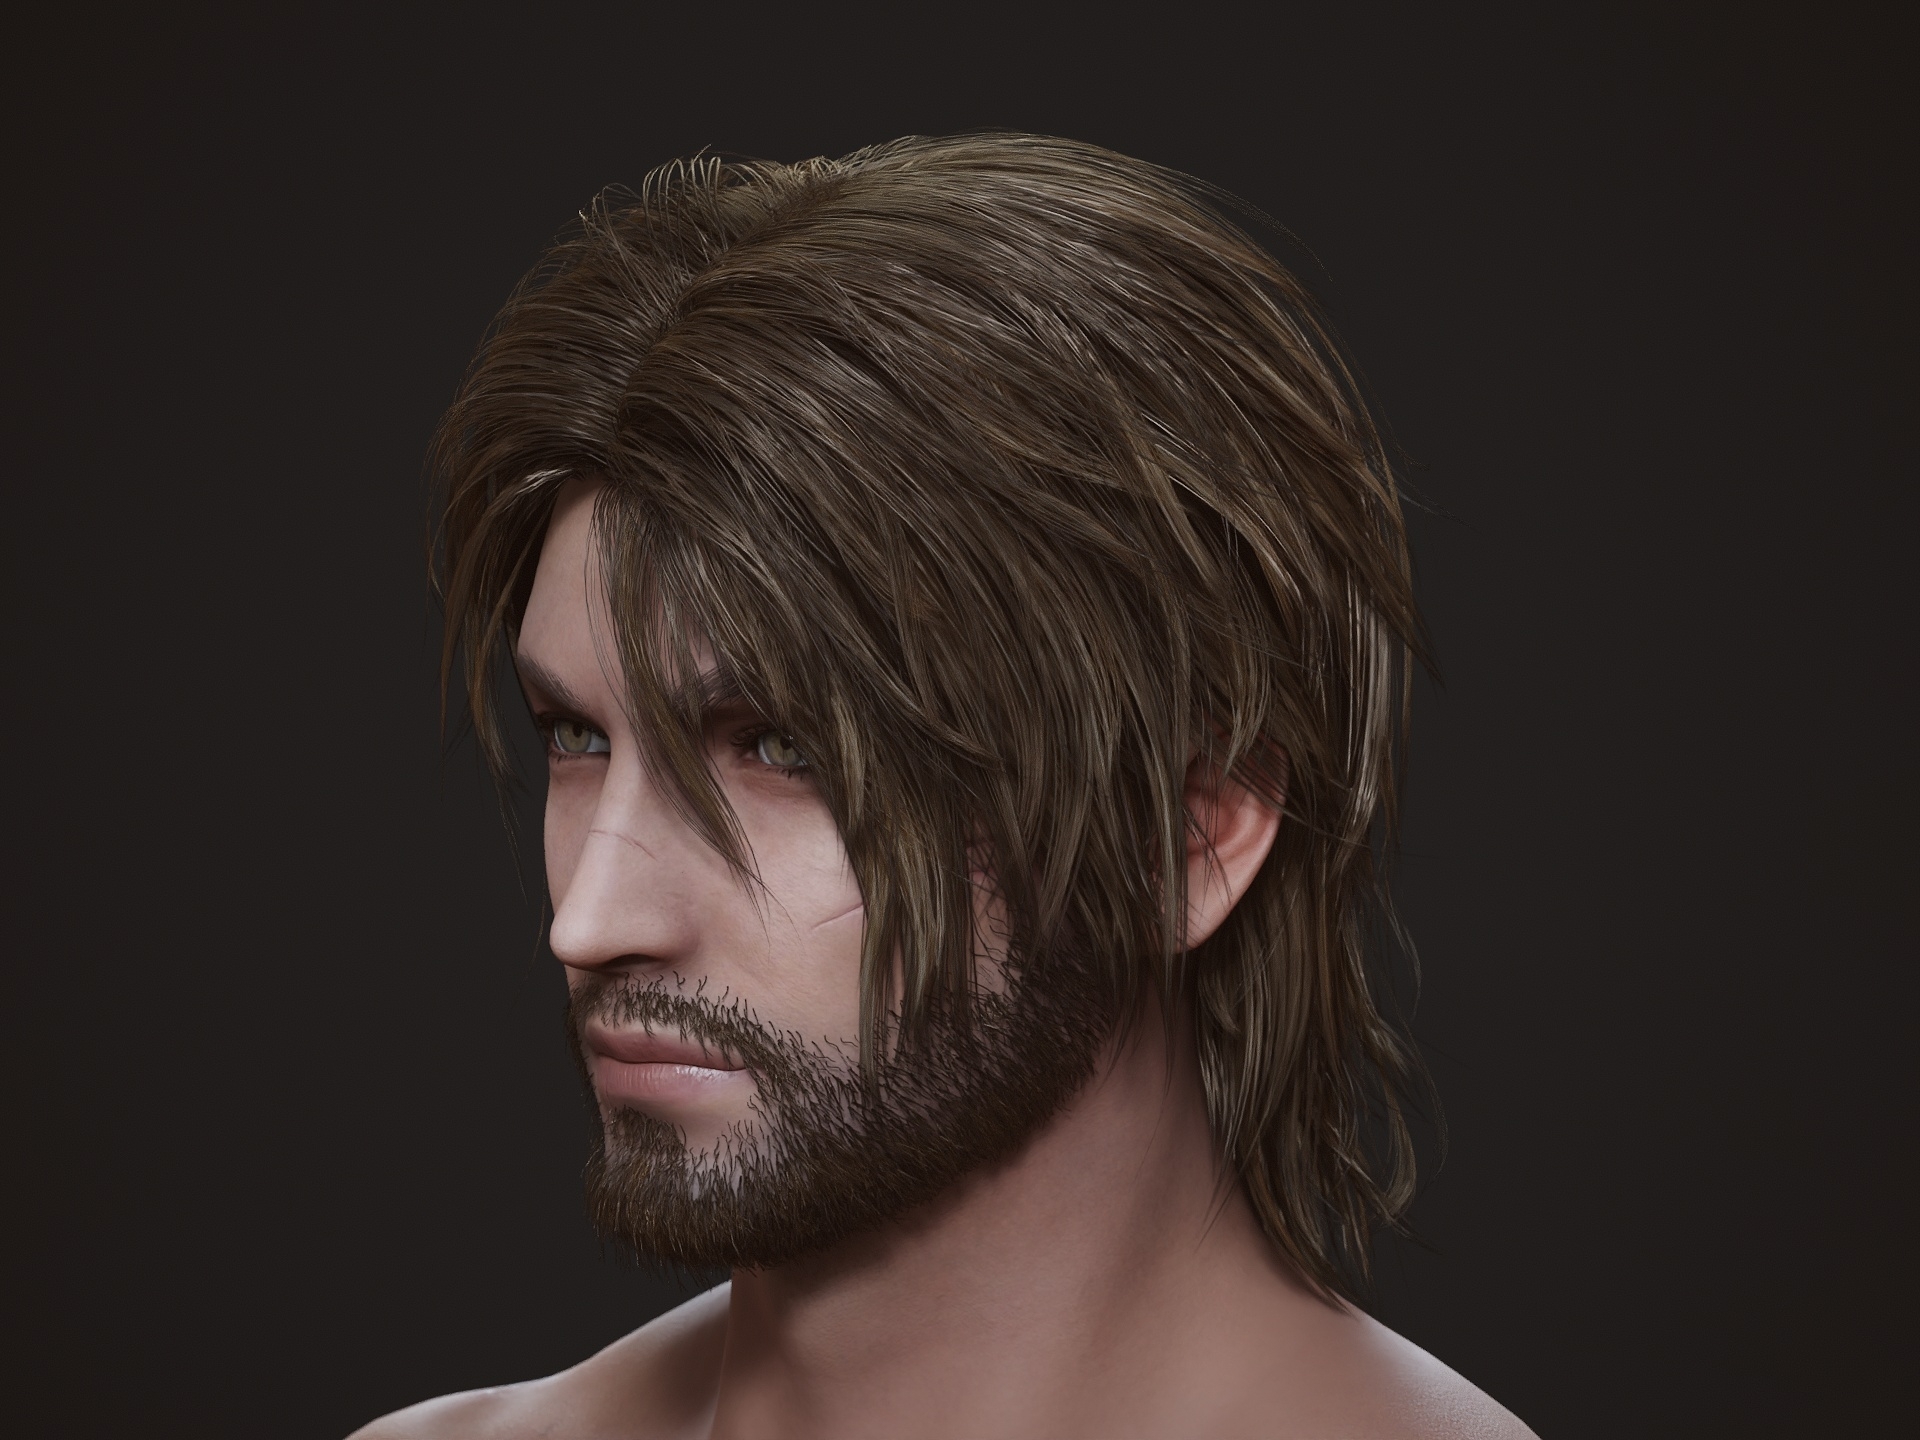 More texture progress and hair work on this Greek guy  Male Warrior Scars Man